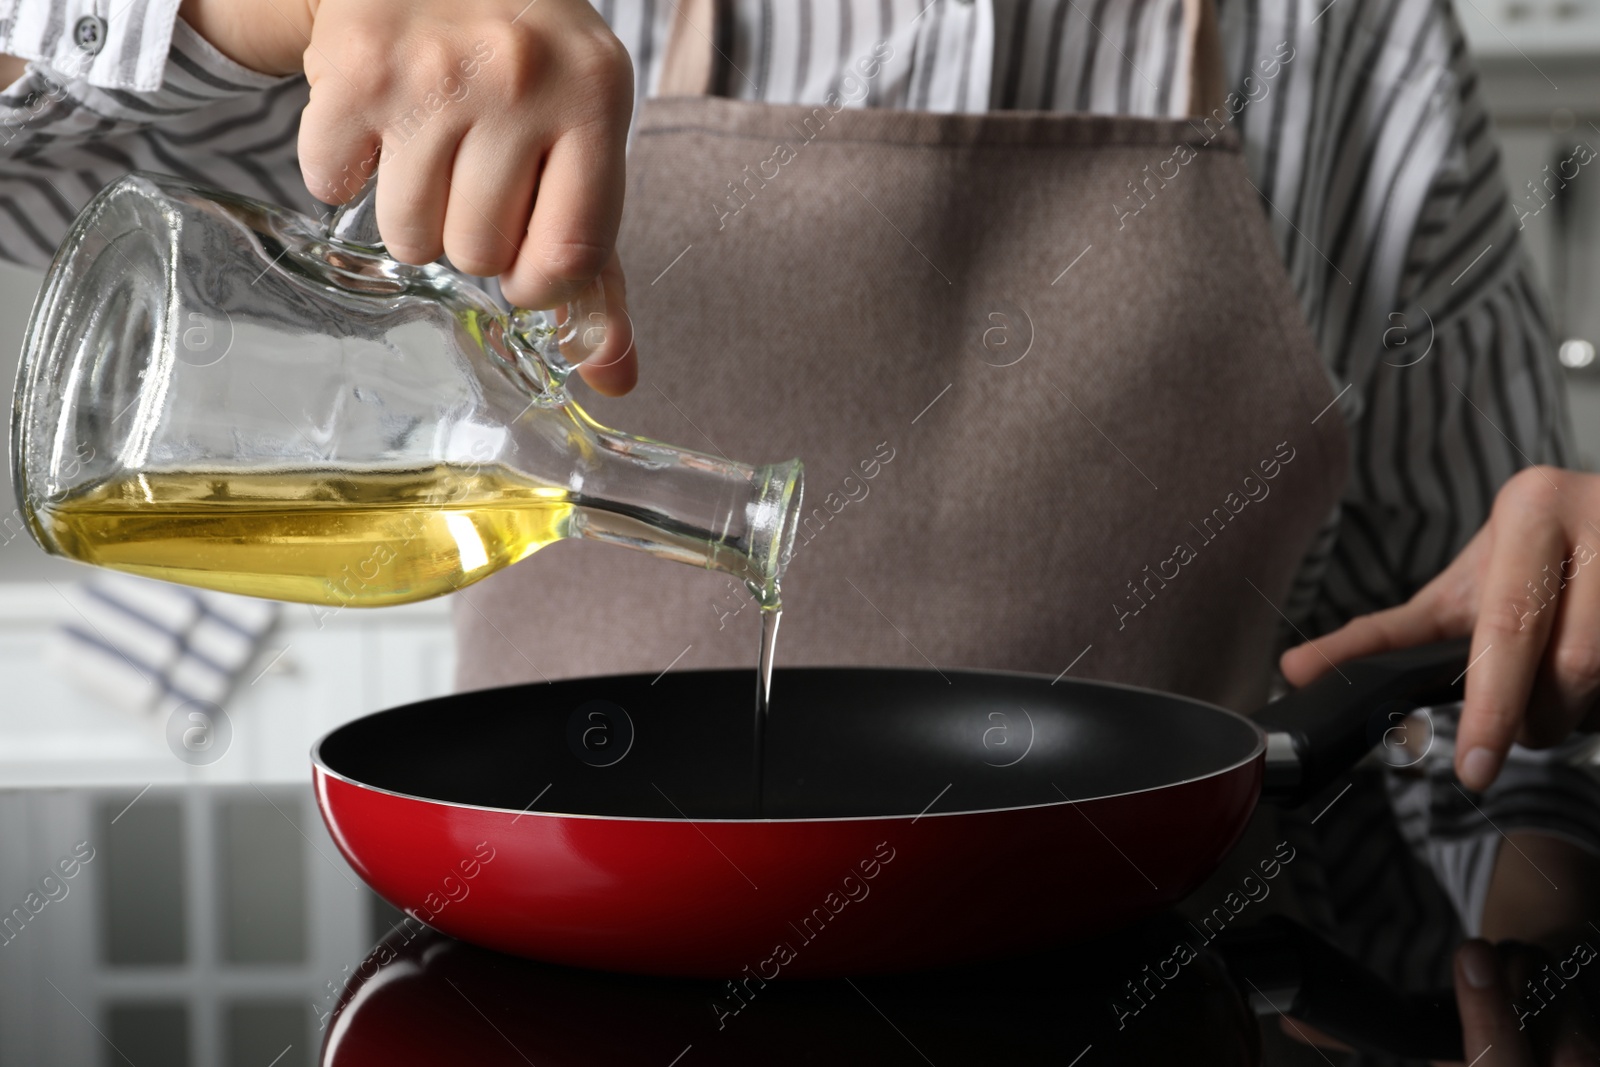 Photo of Woman pouring cooking oil from jug into frying pan on stove, closeup